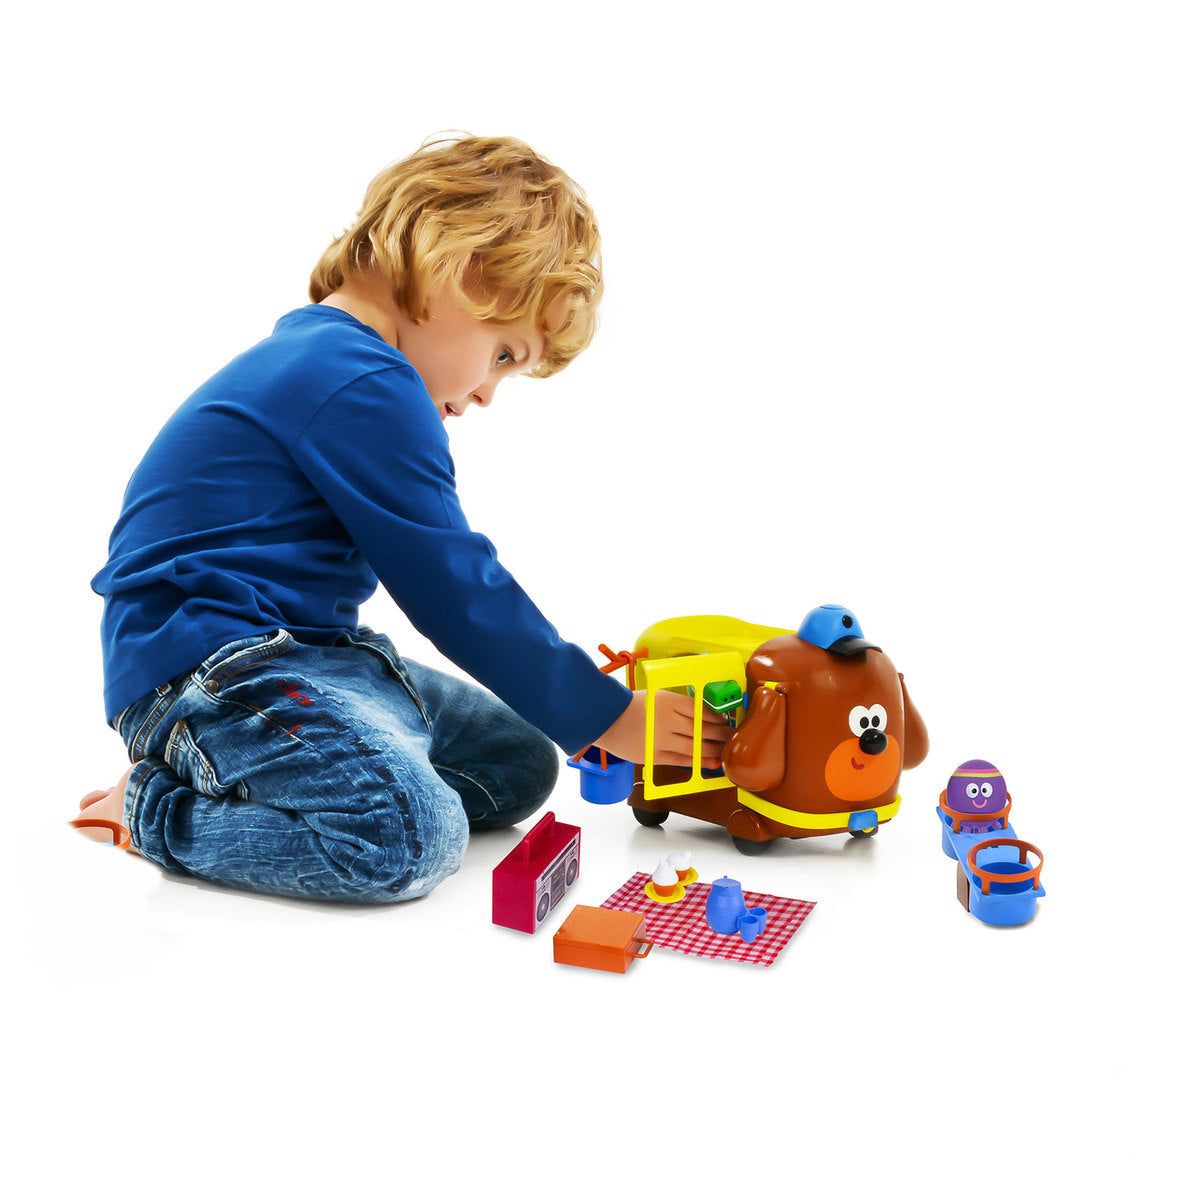 Hey Duggee Adventure Bus and Playset